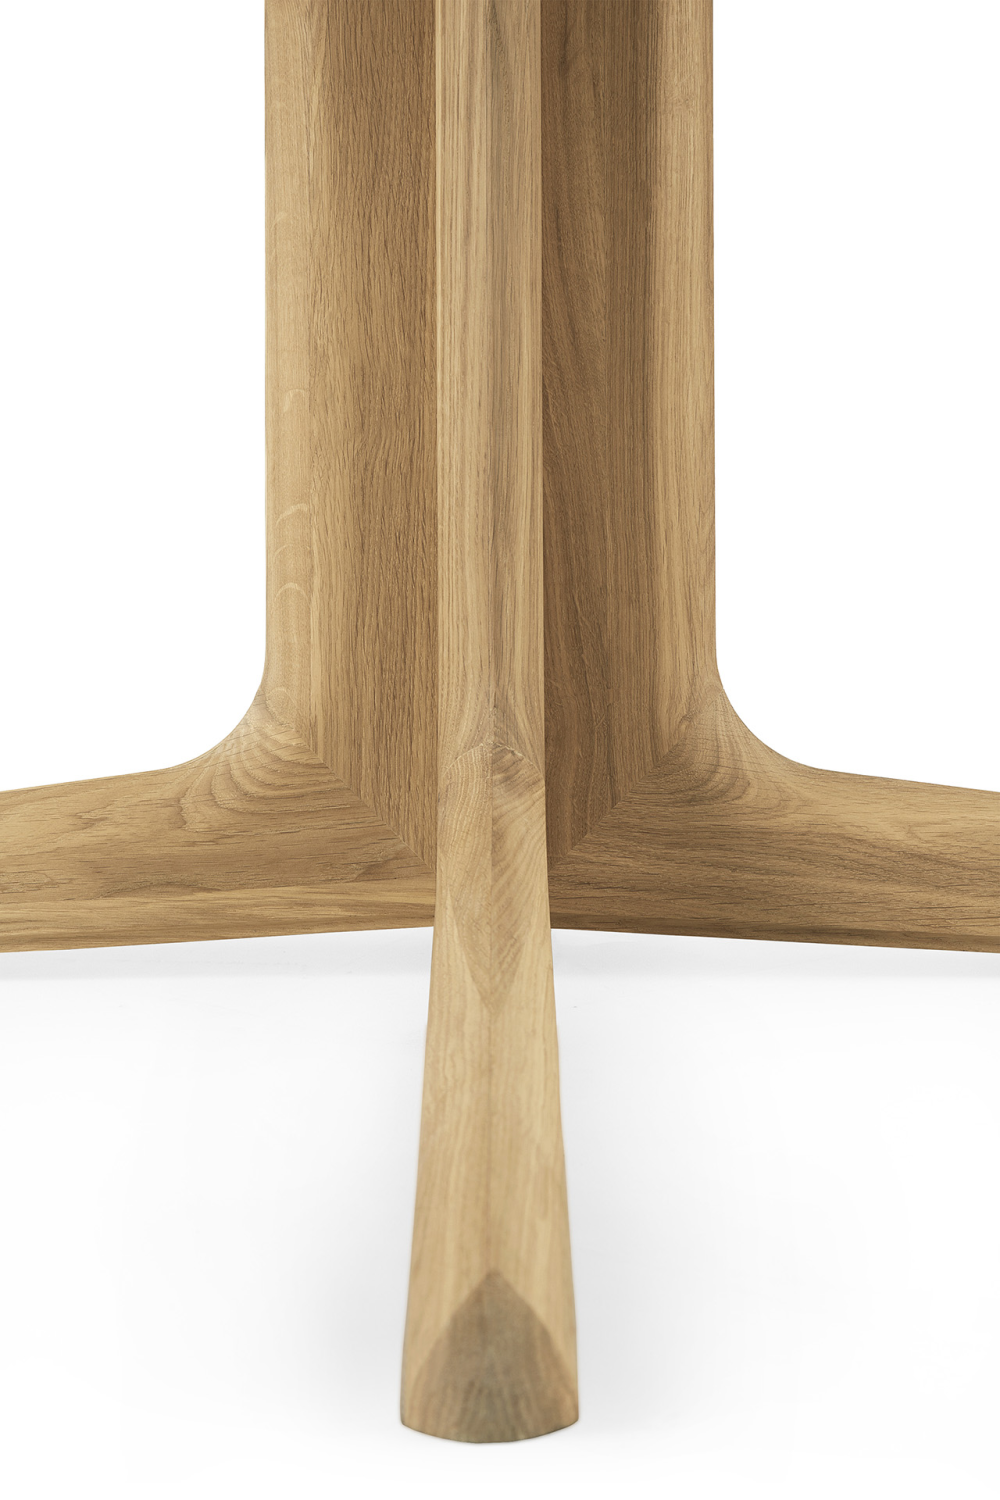 Central-Footed Oiled Oak Dining Table | Ethnicraft Corto | Oroa.com